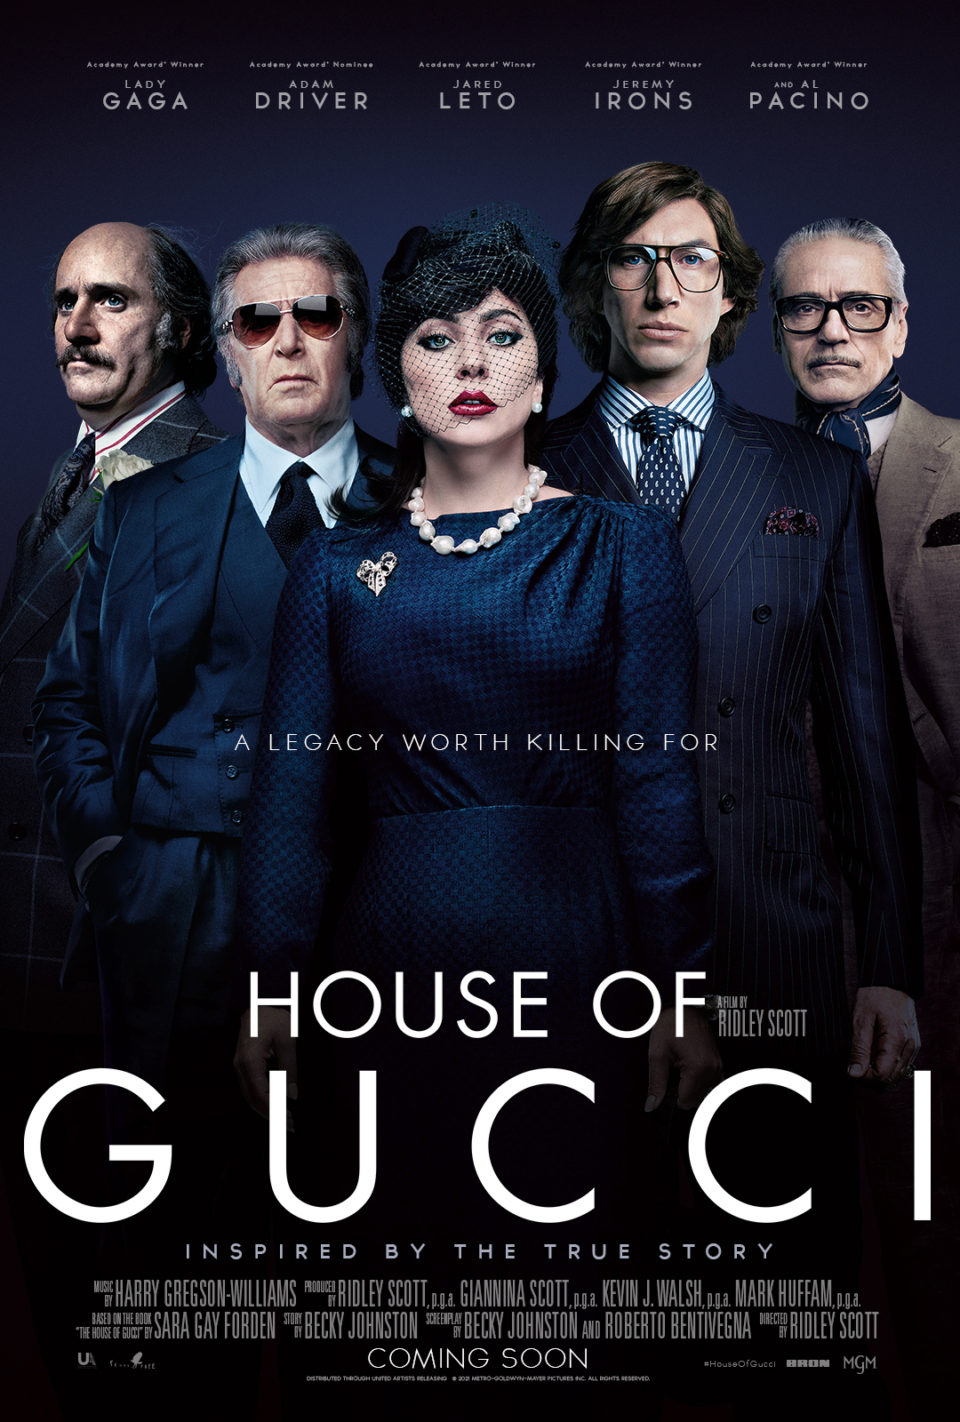 House of Gucci staring Lady Gaga and Adam Driver